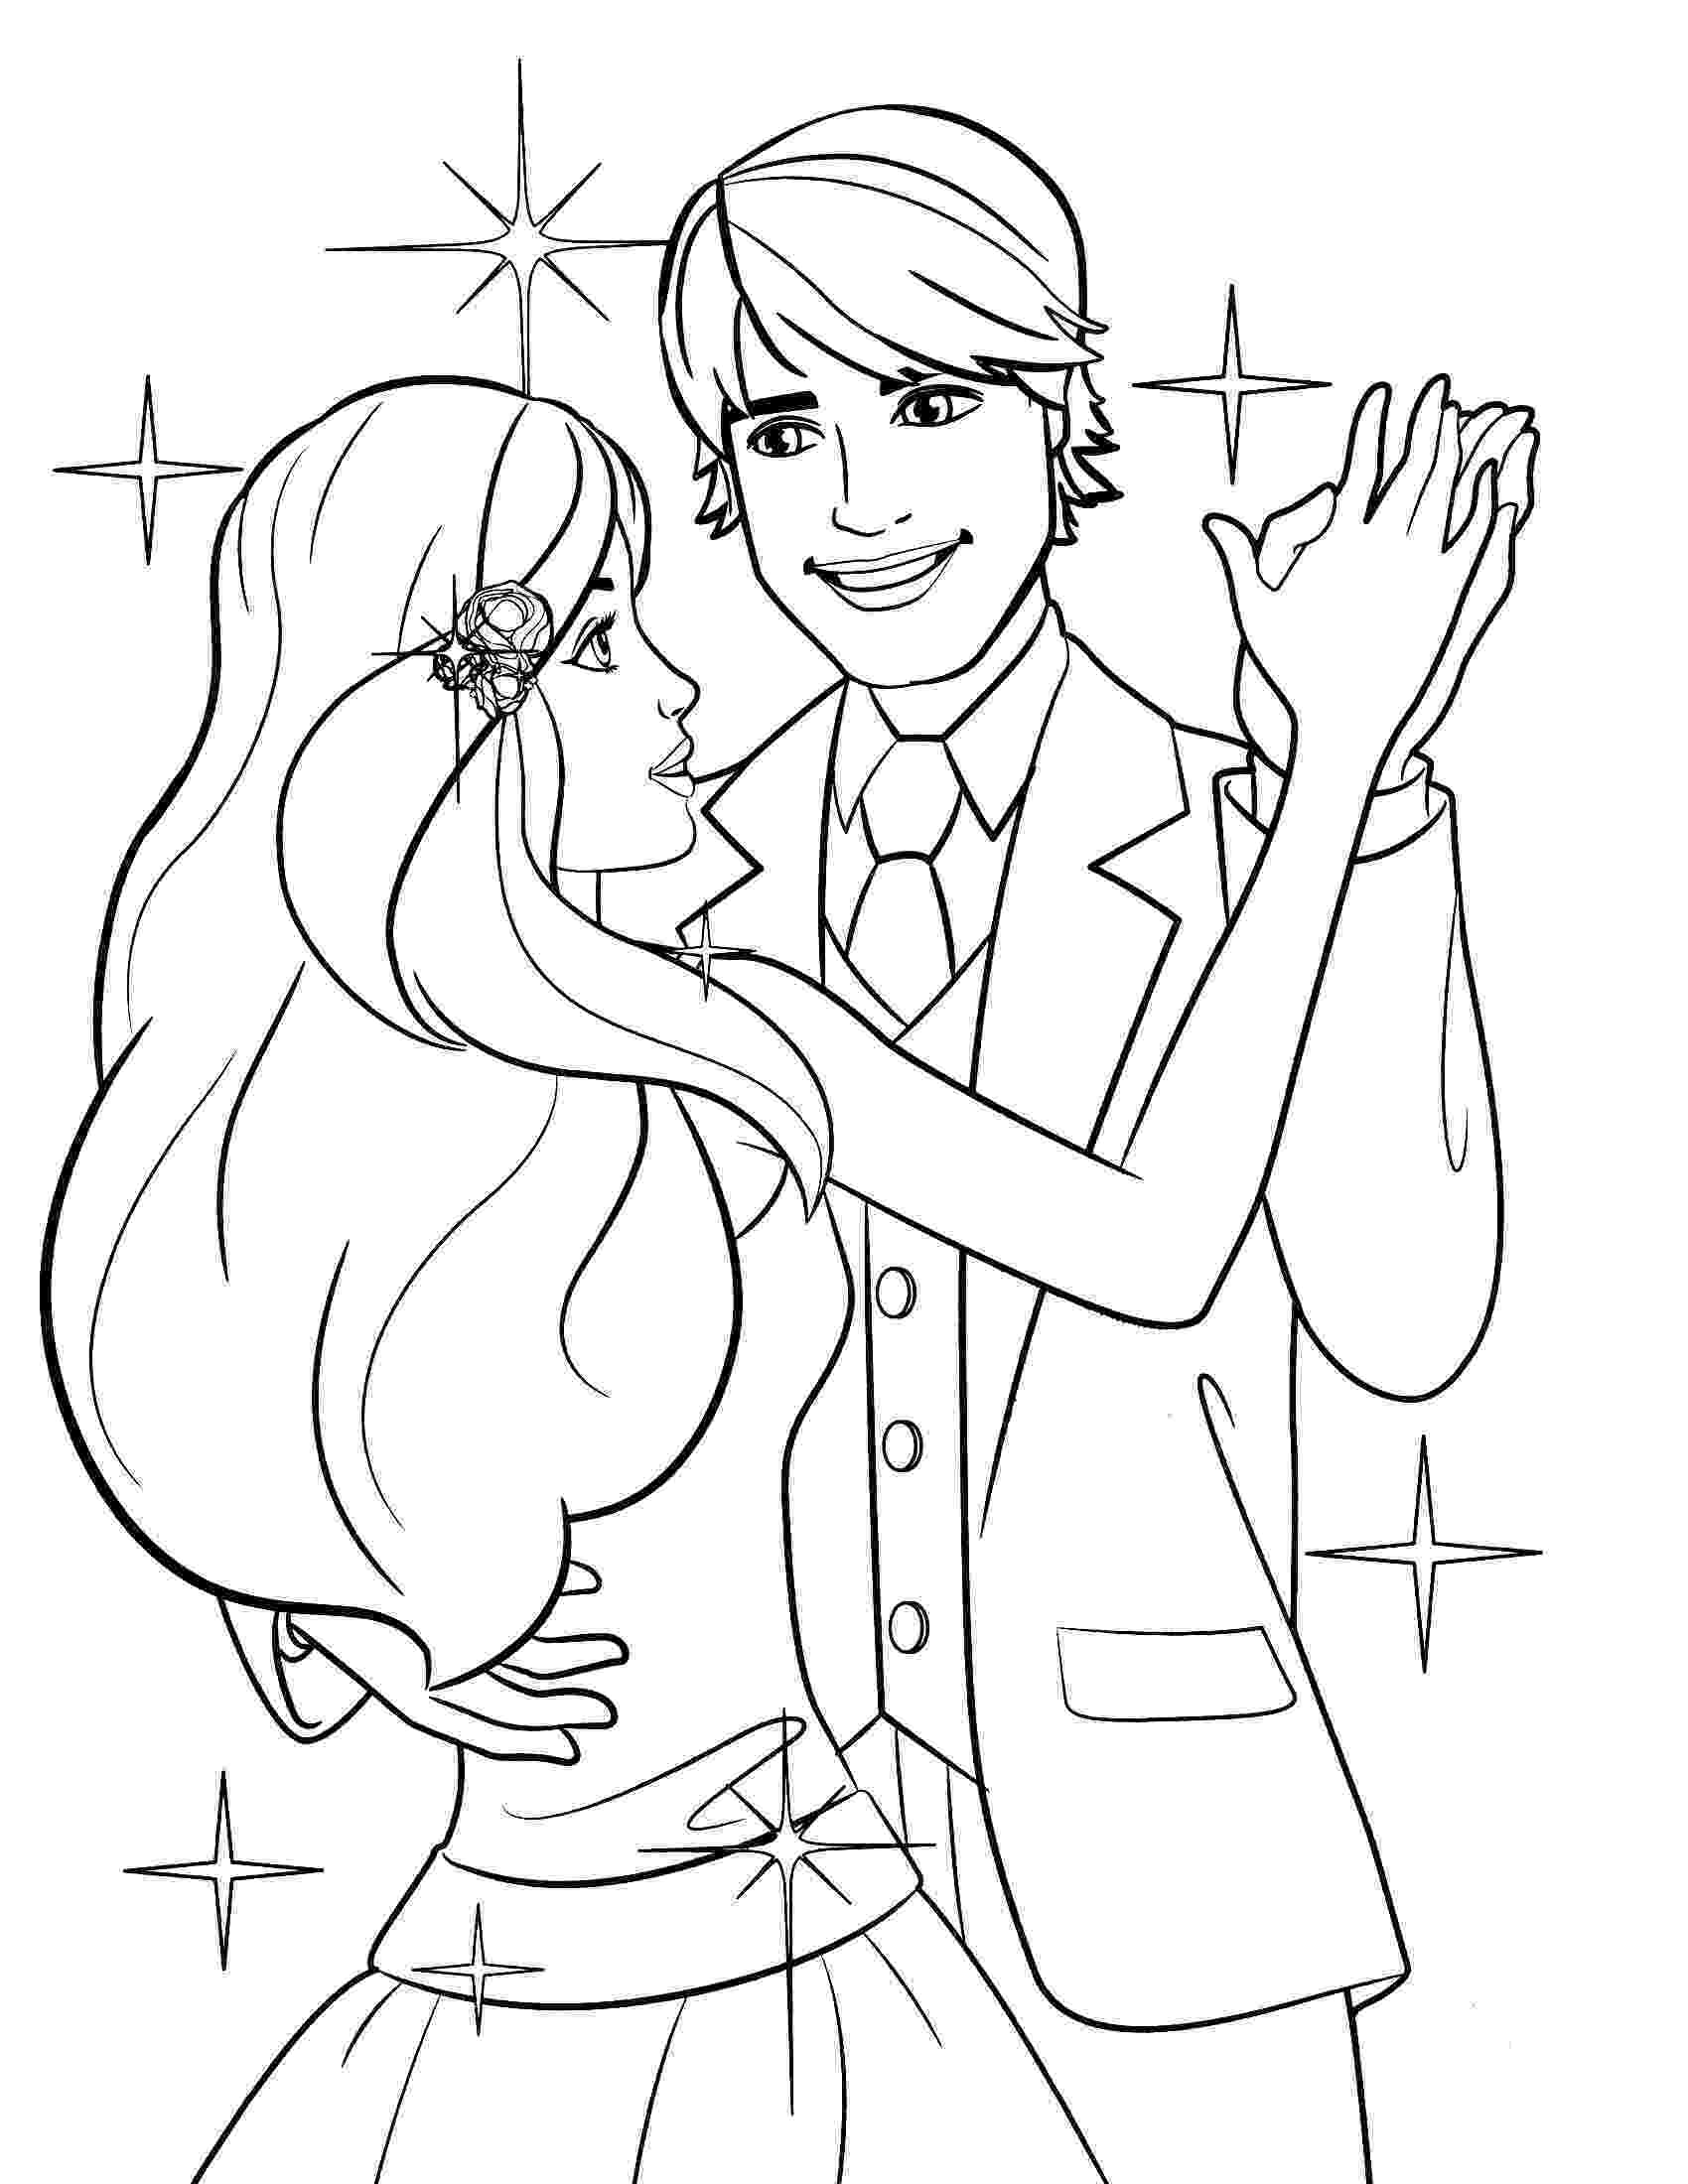 wedding coloring book wedding coloring pages best coloring pages for kids book coloring wedding 